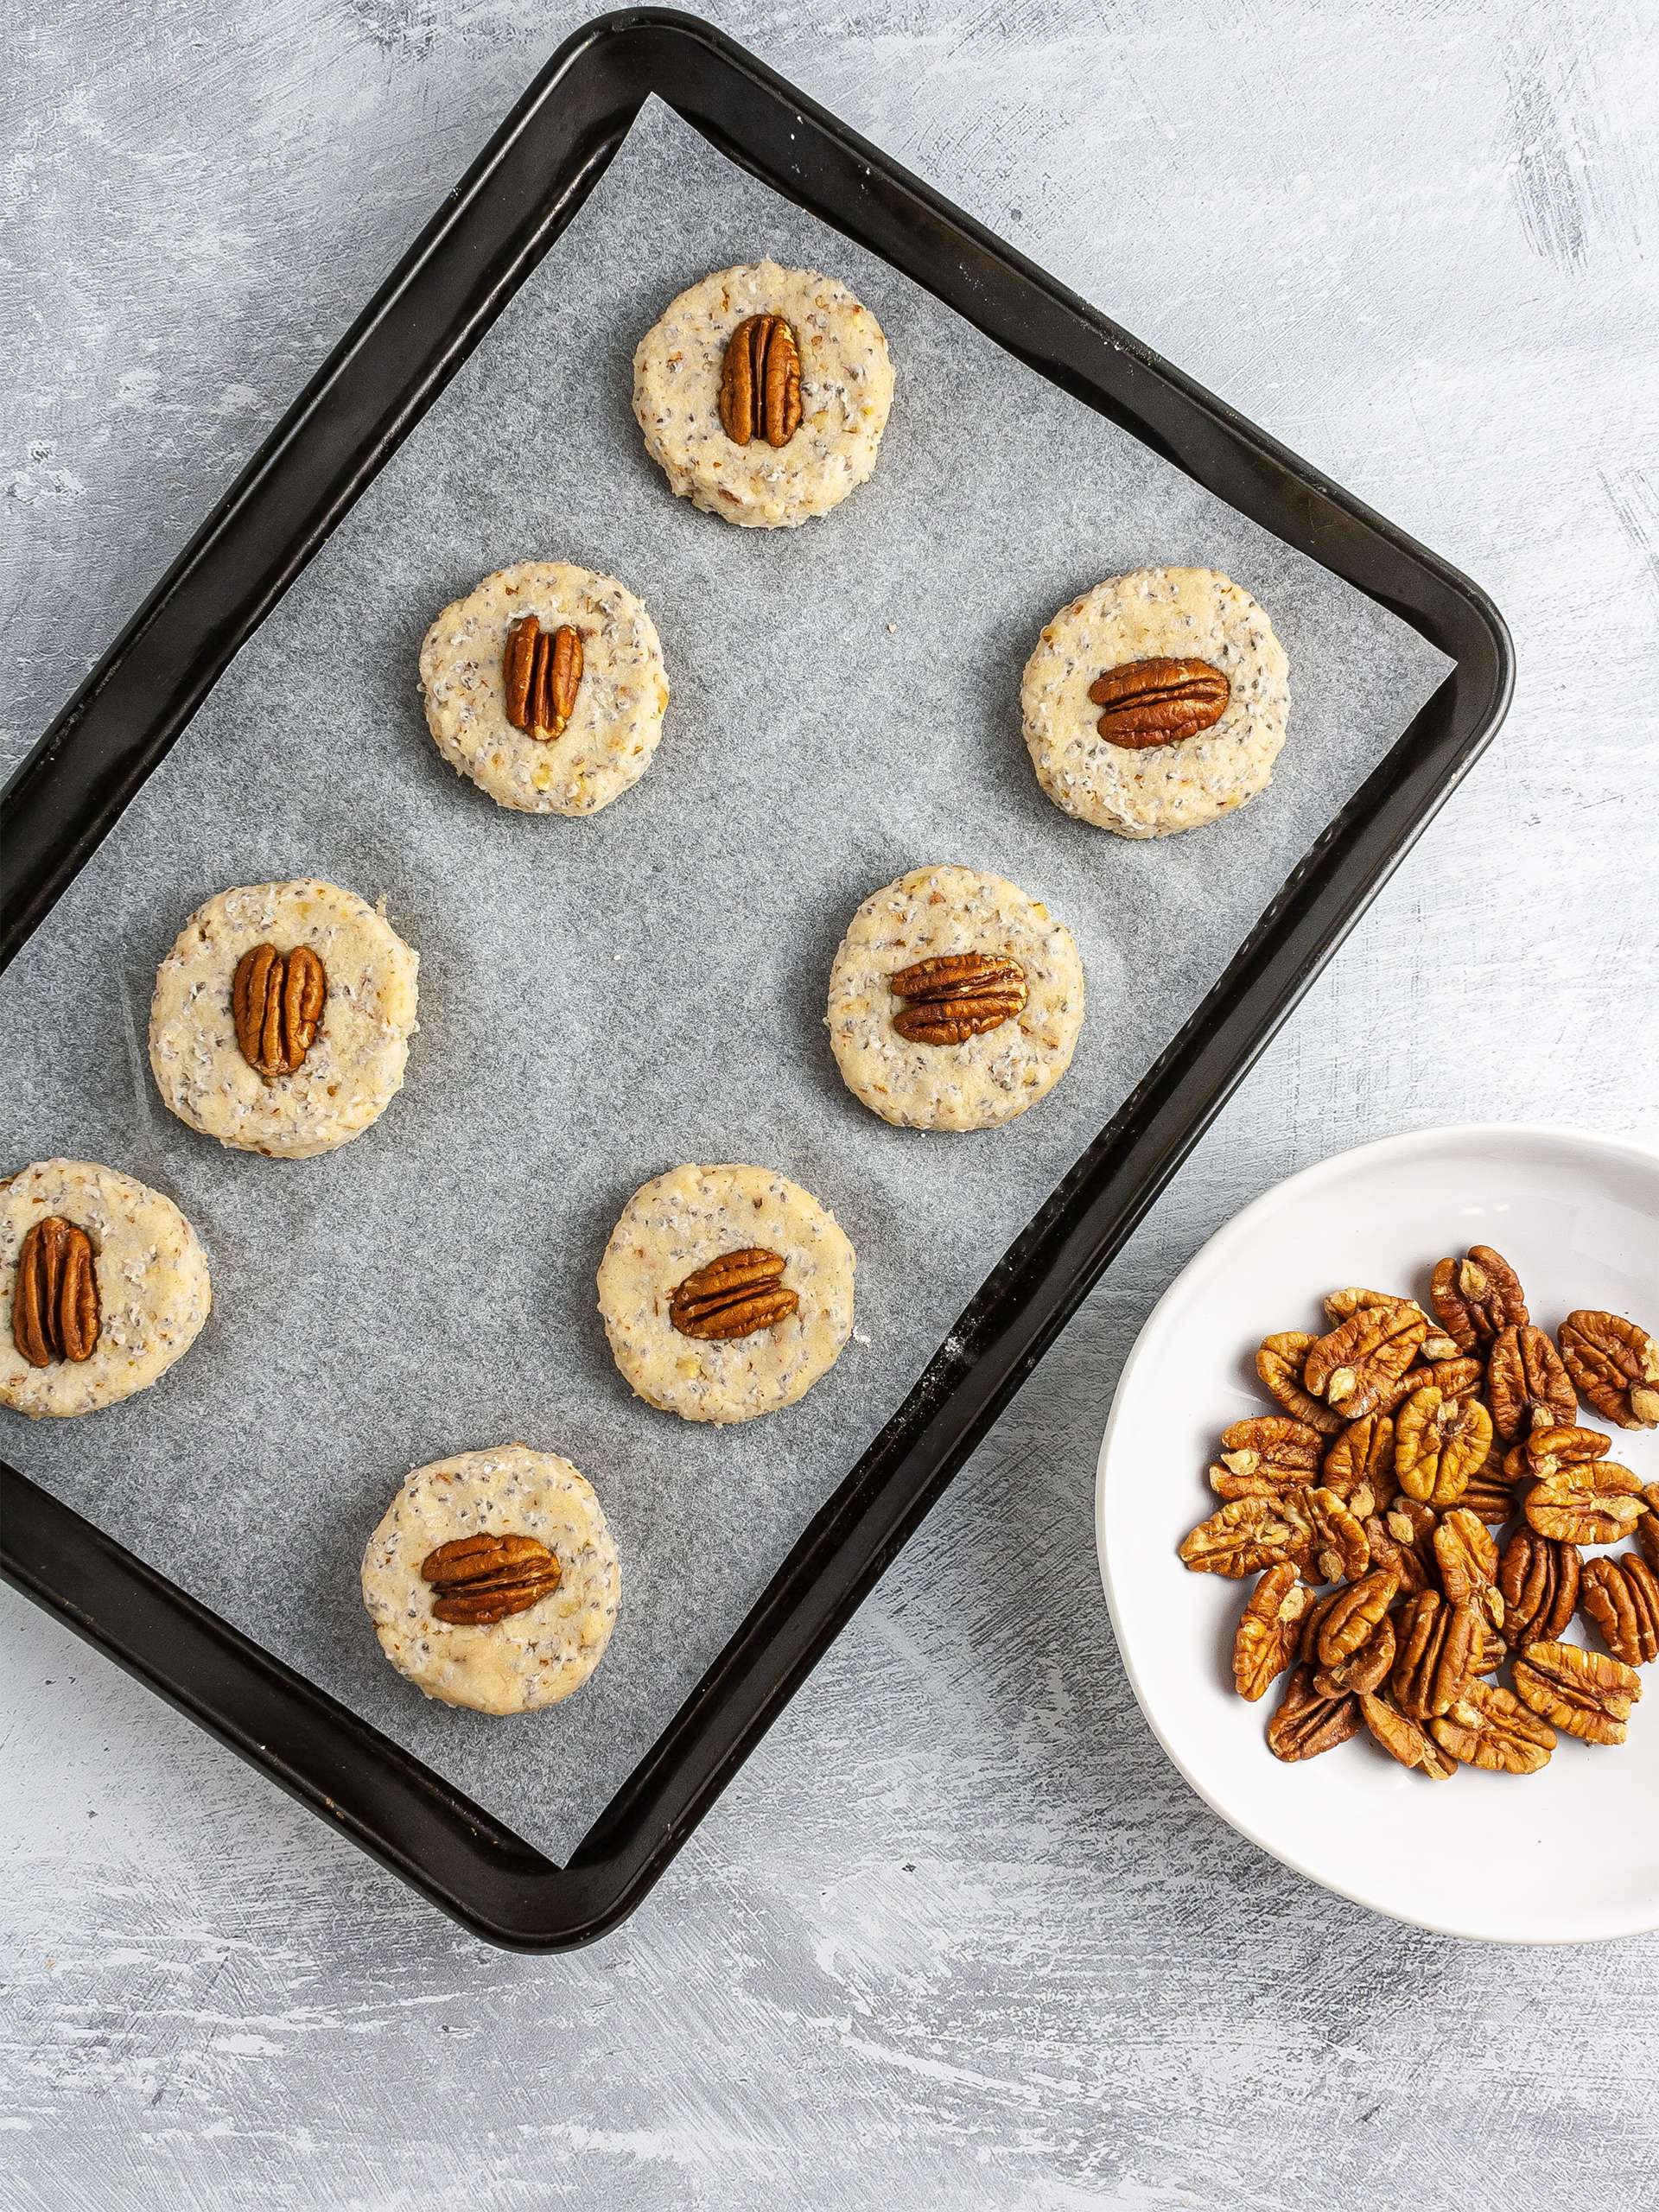 Shaped sandies topped with pecan nuts